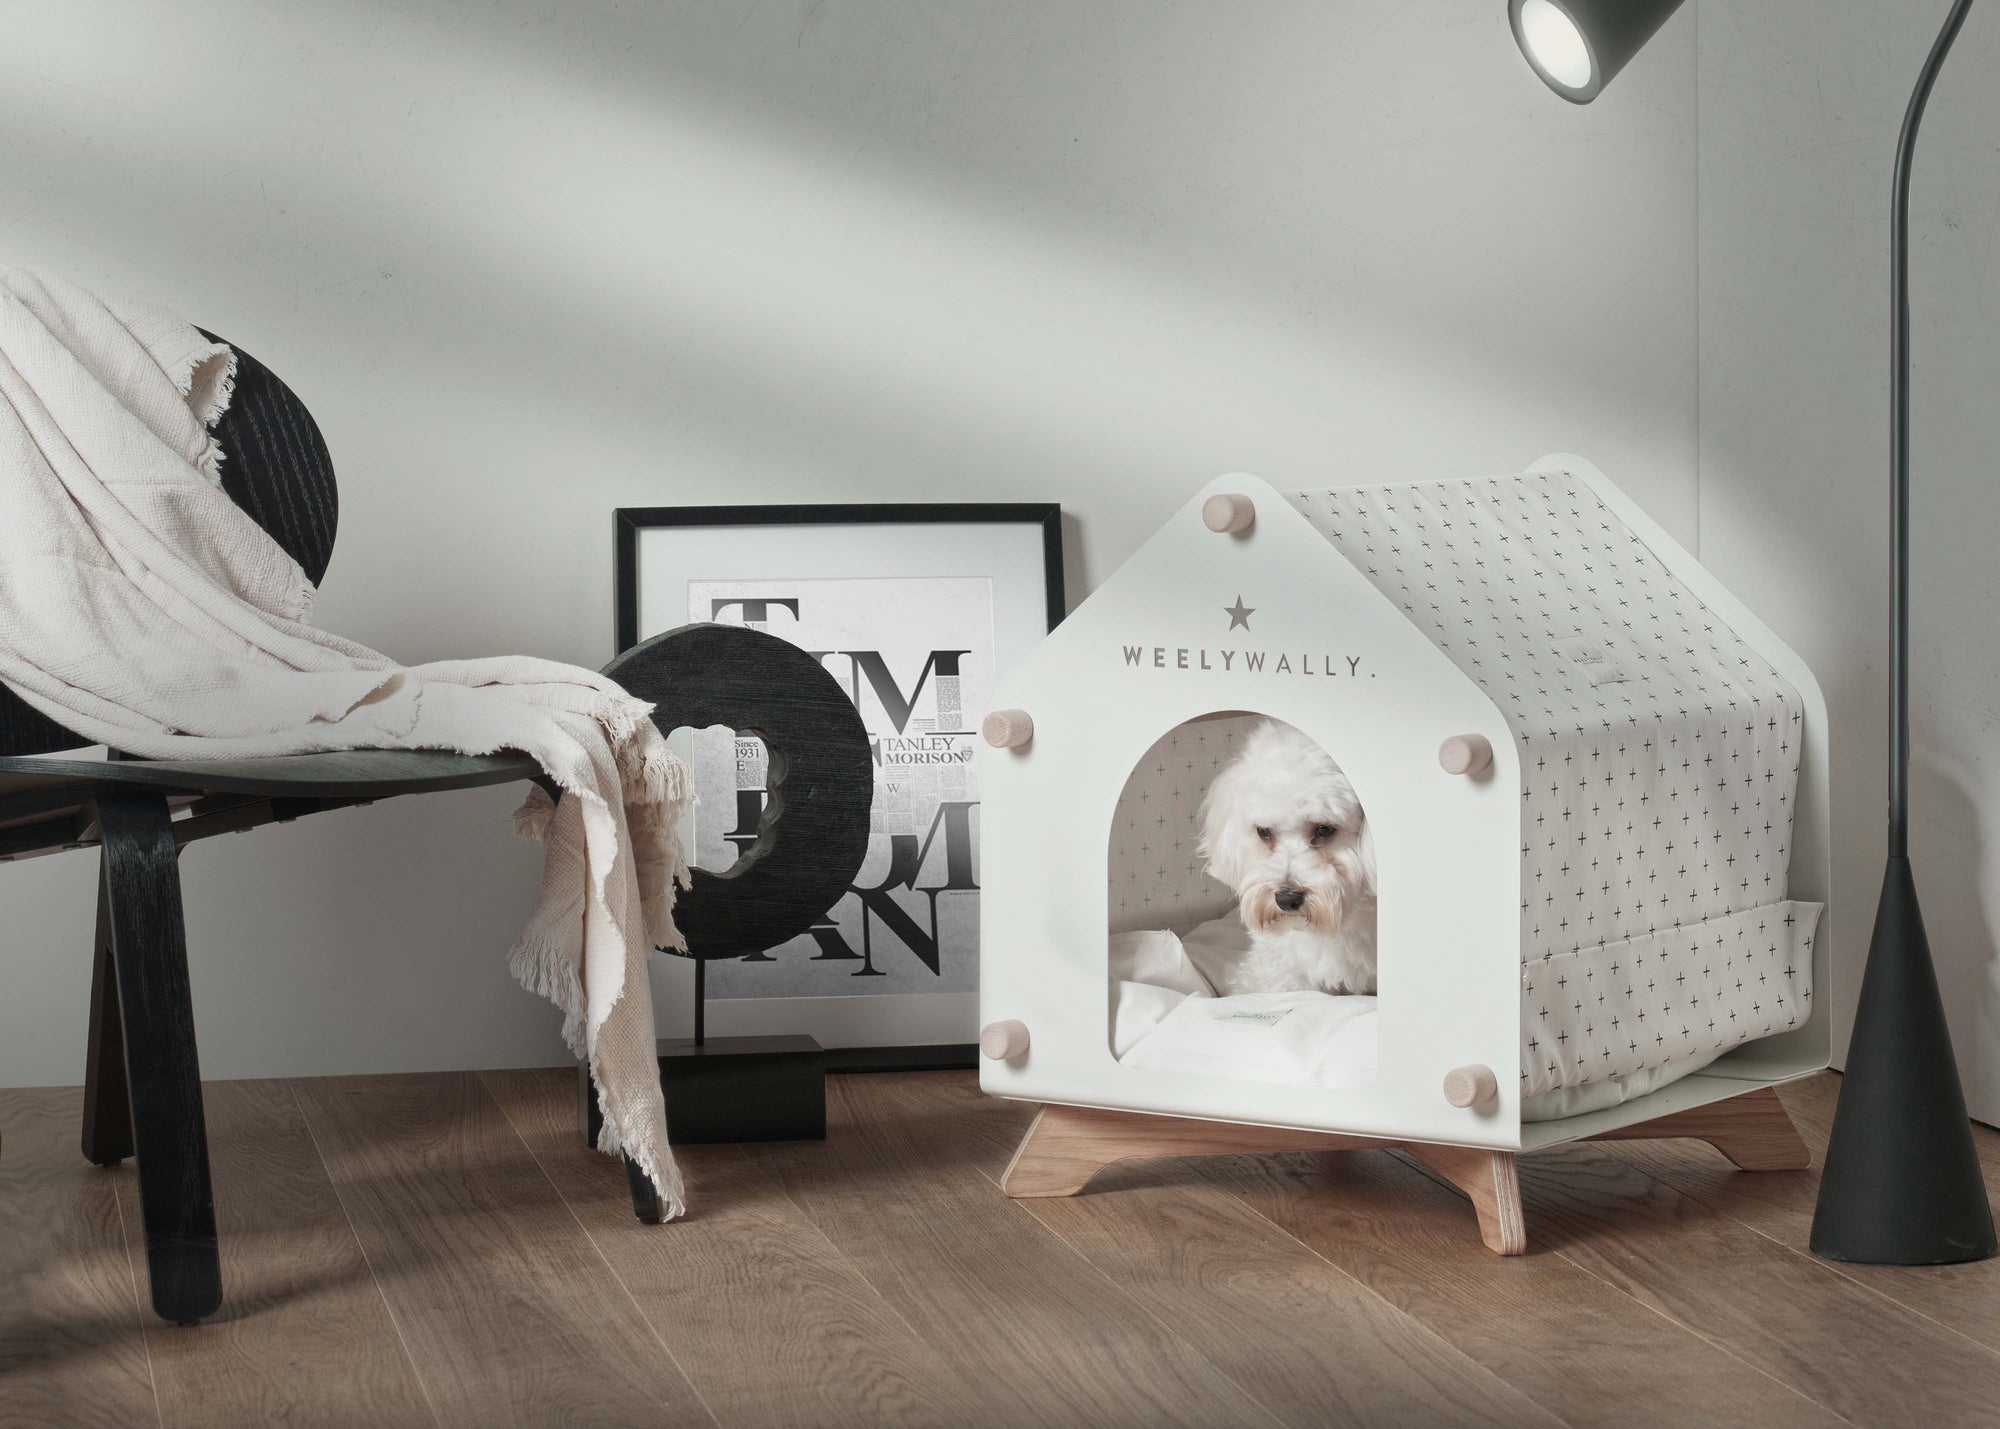 Every pet deserves the best - house & bed for your cat's or dog's!